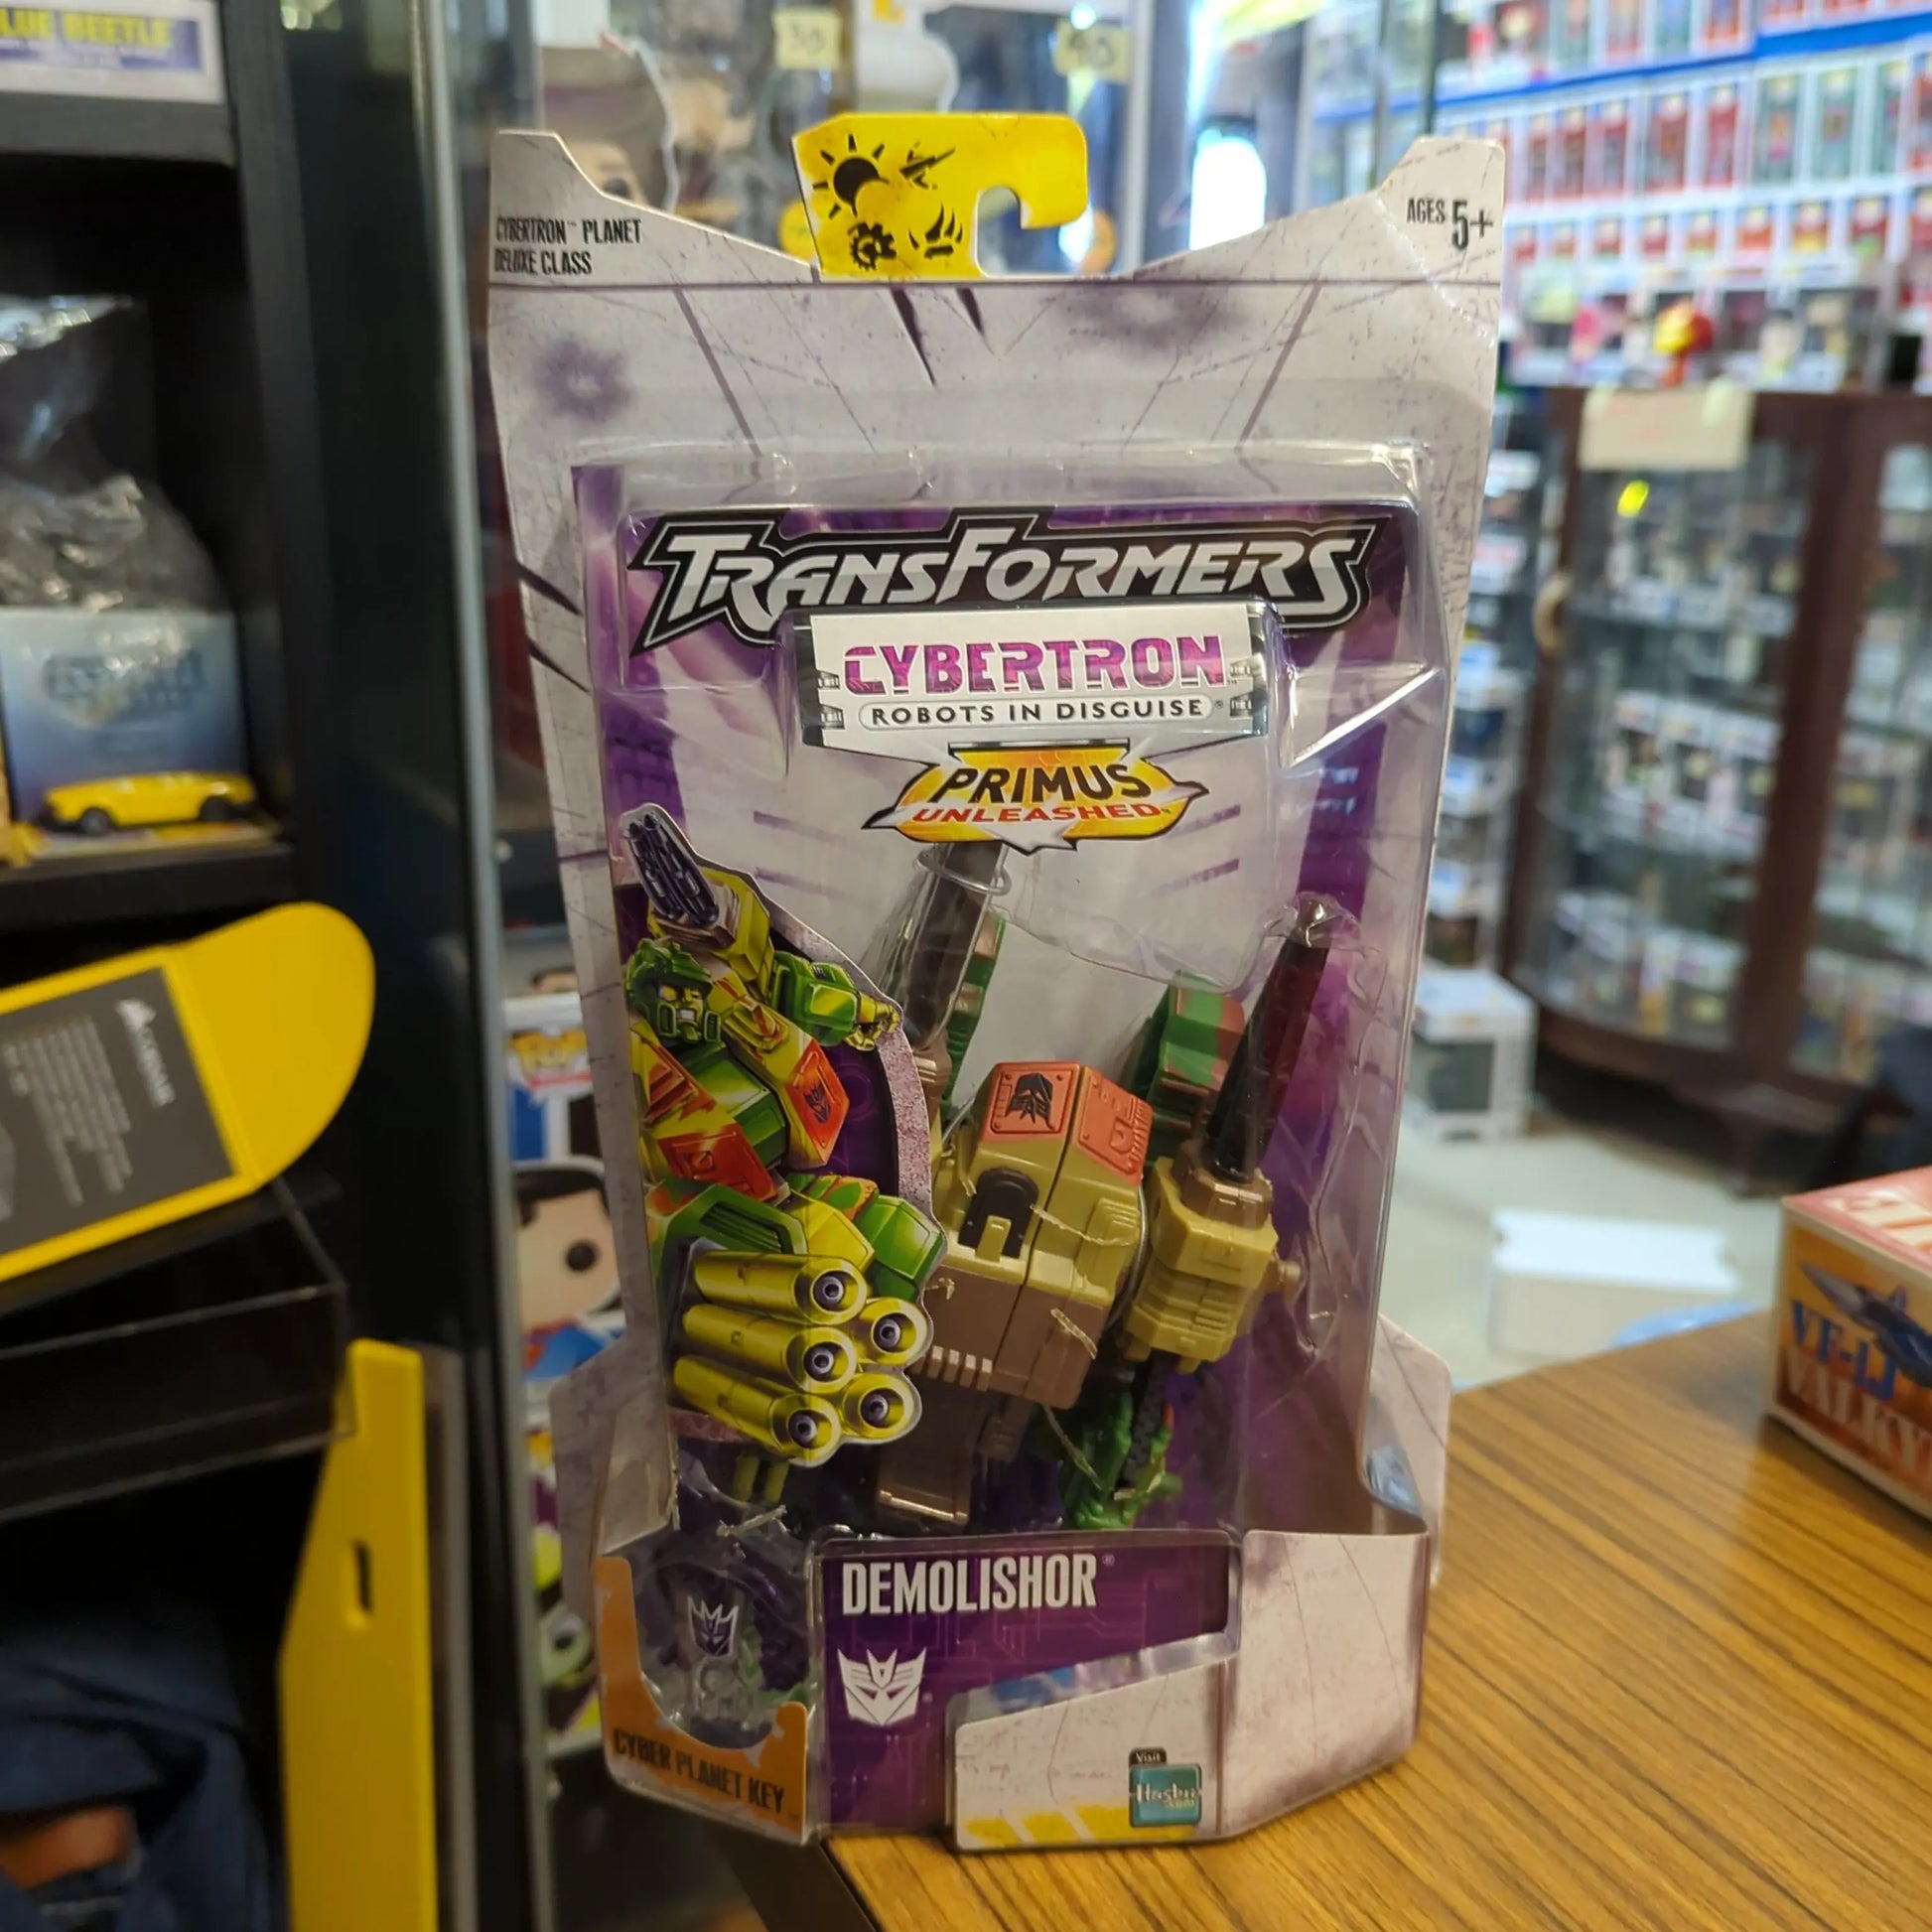 Transformers Cybertron 2005 Deluxe Class Demolishor MOC New Factory Sealed FRENLY BRICKS - Open 7 Days